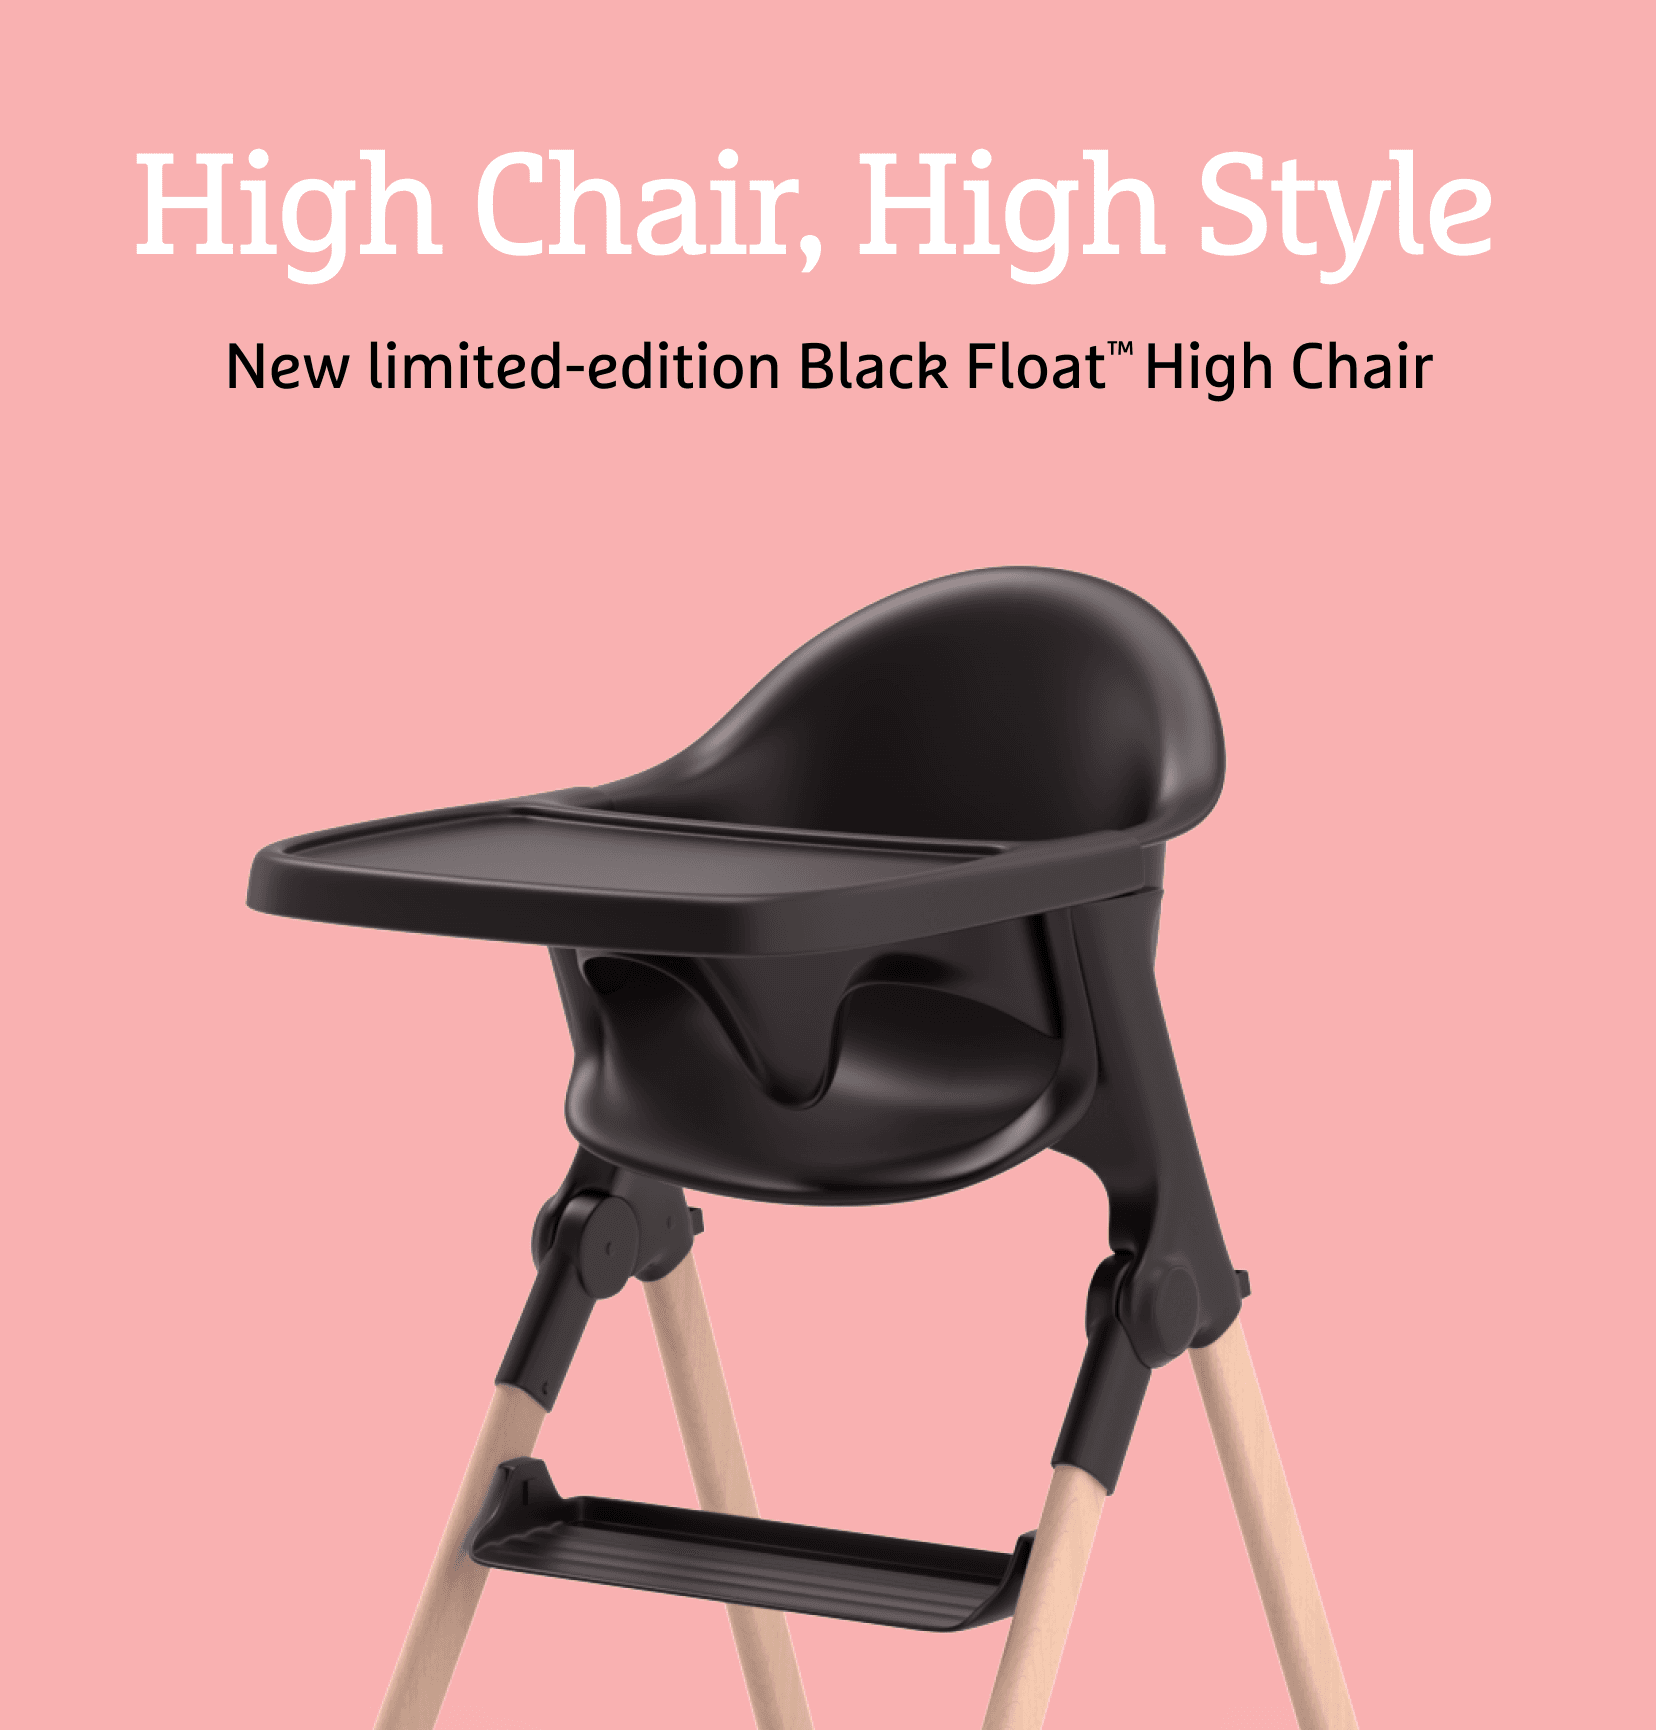 High chair, high style. New limited-edition Black Float Highchair